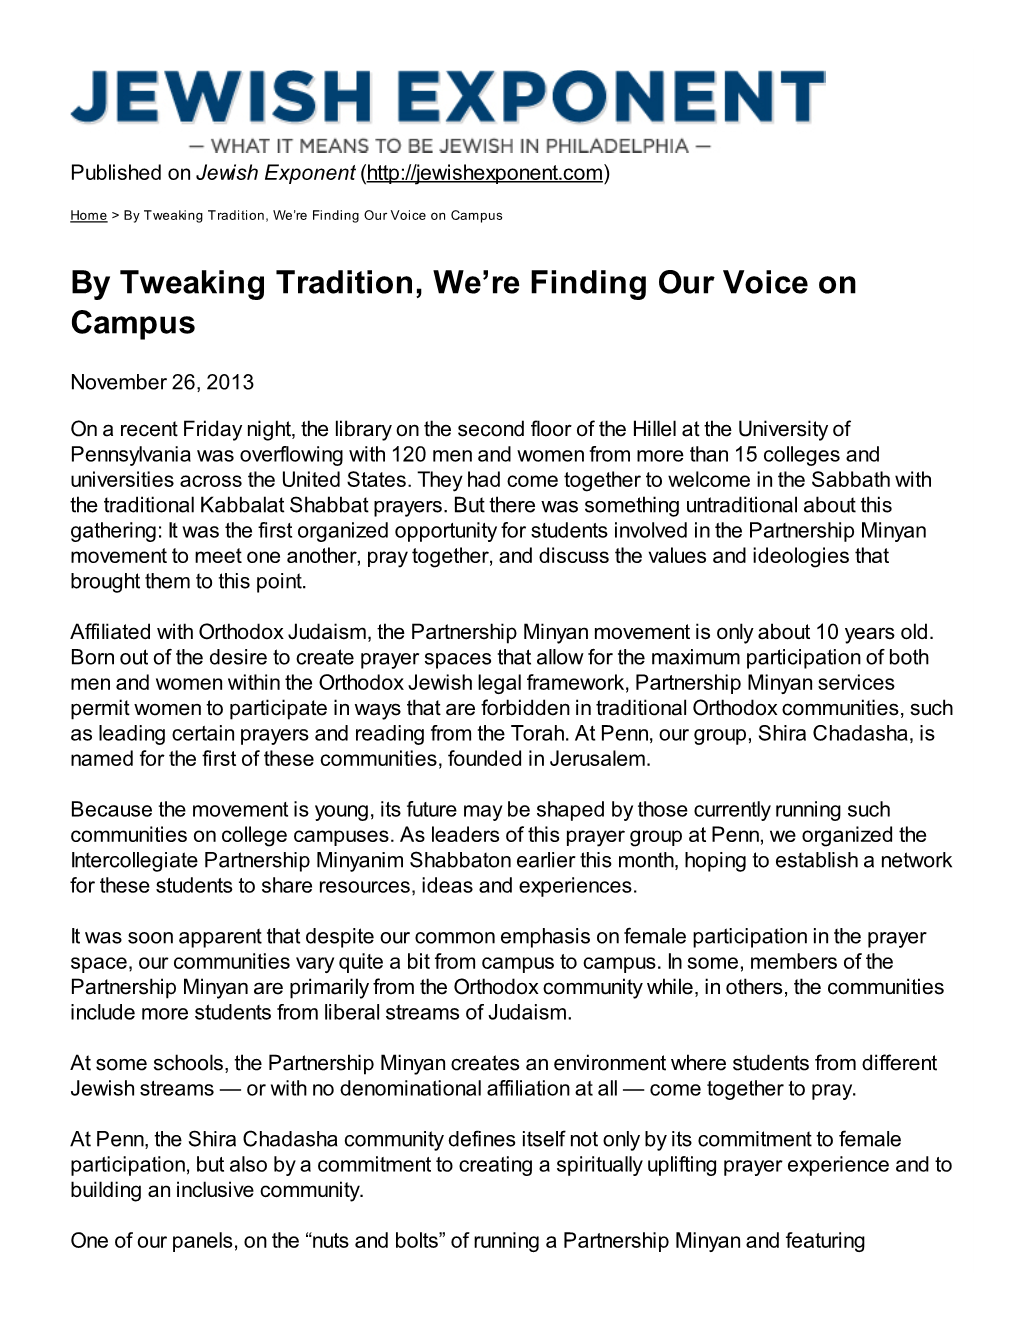 By Tweaking Tradition, We're Finding Our Voice on Campus